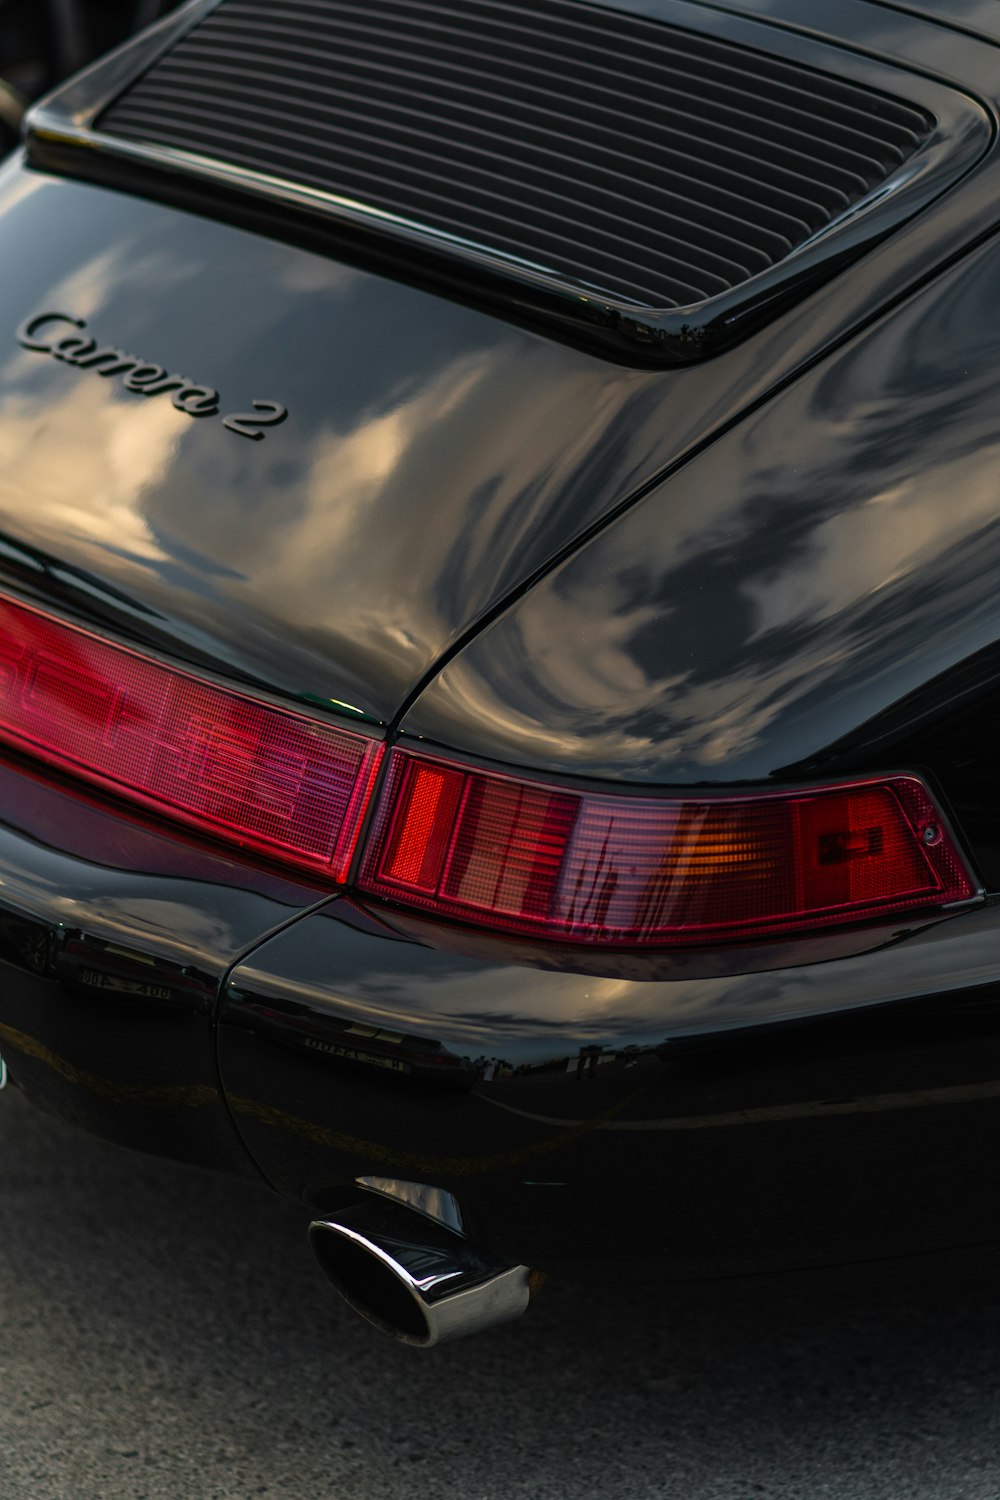 a close up of the tail lights of a black sports car